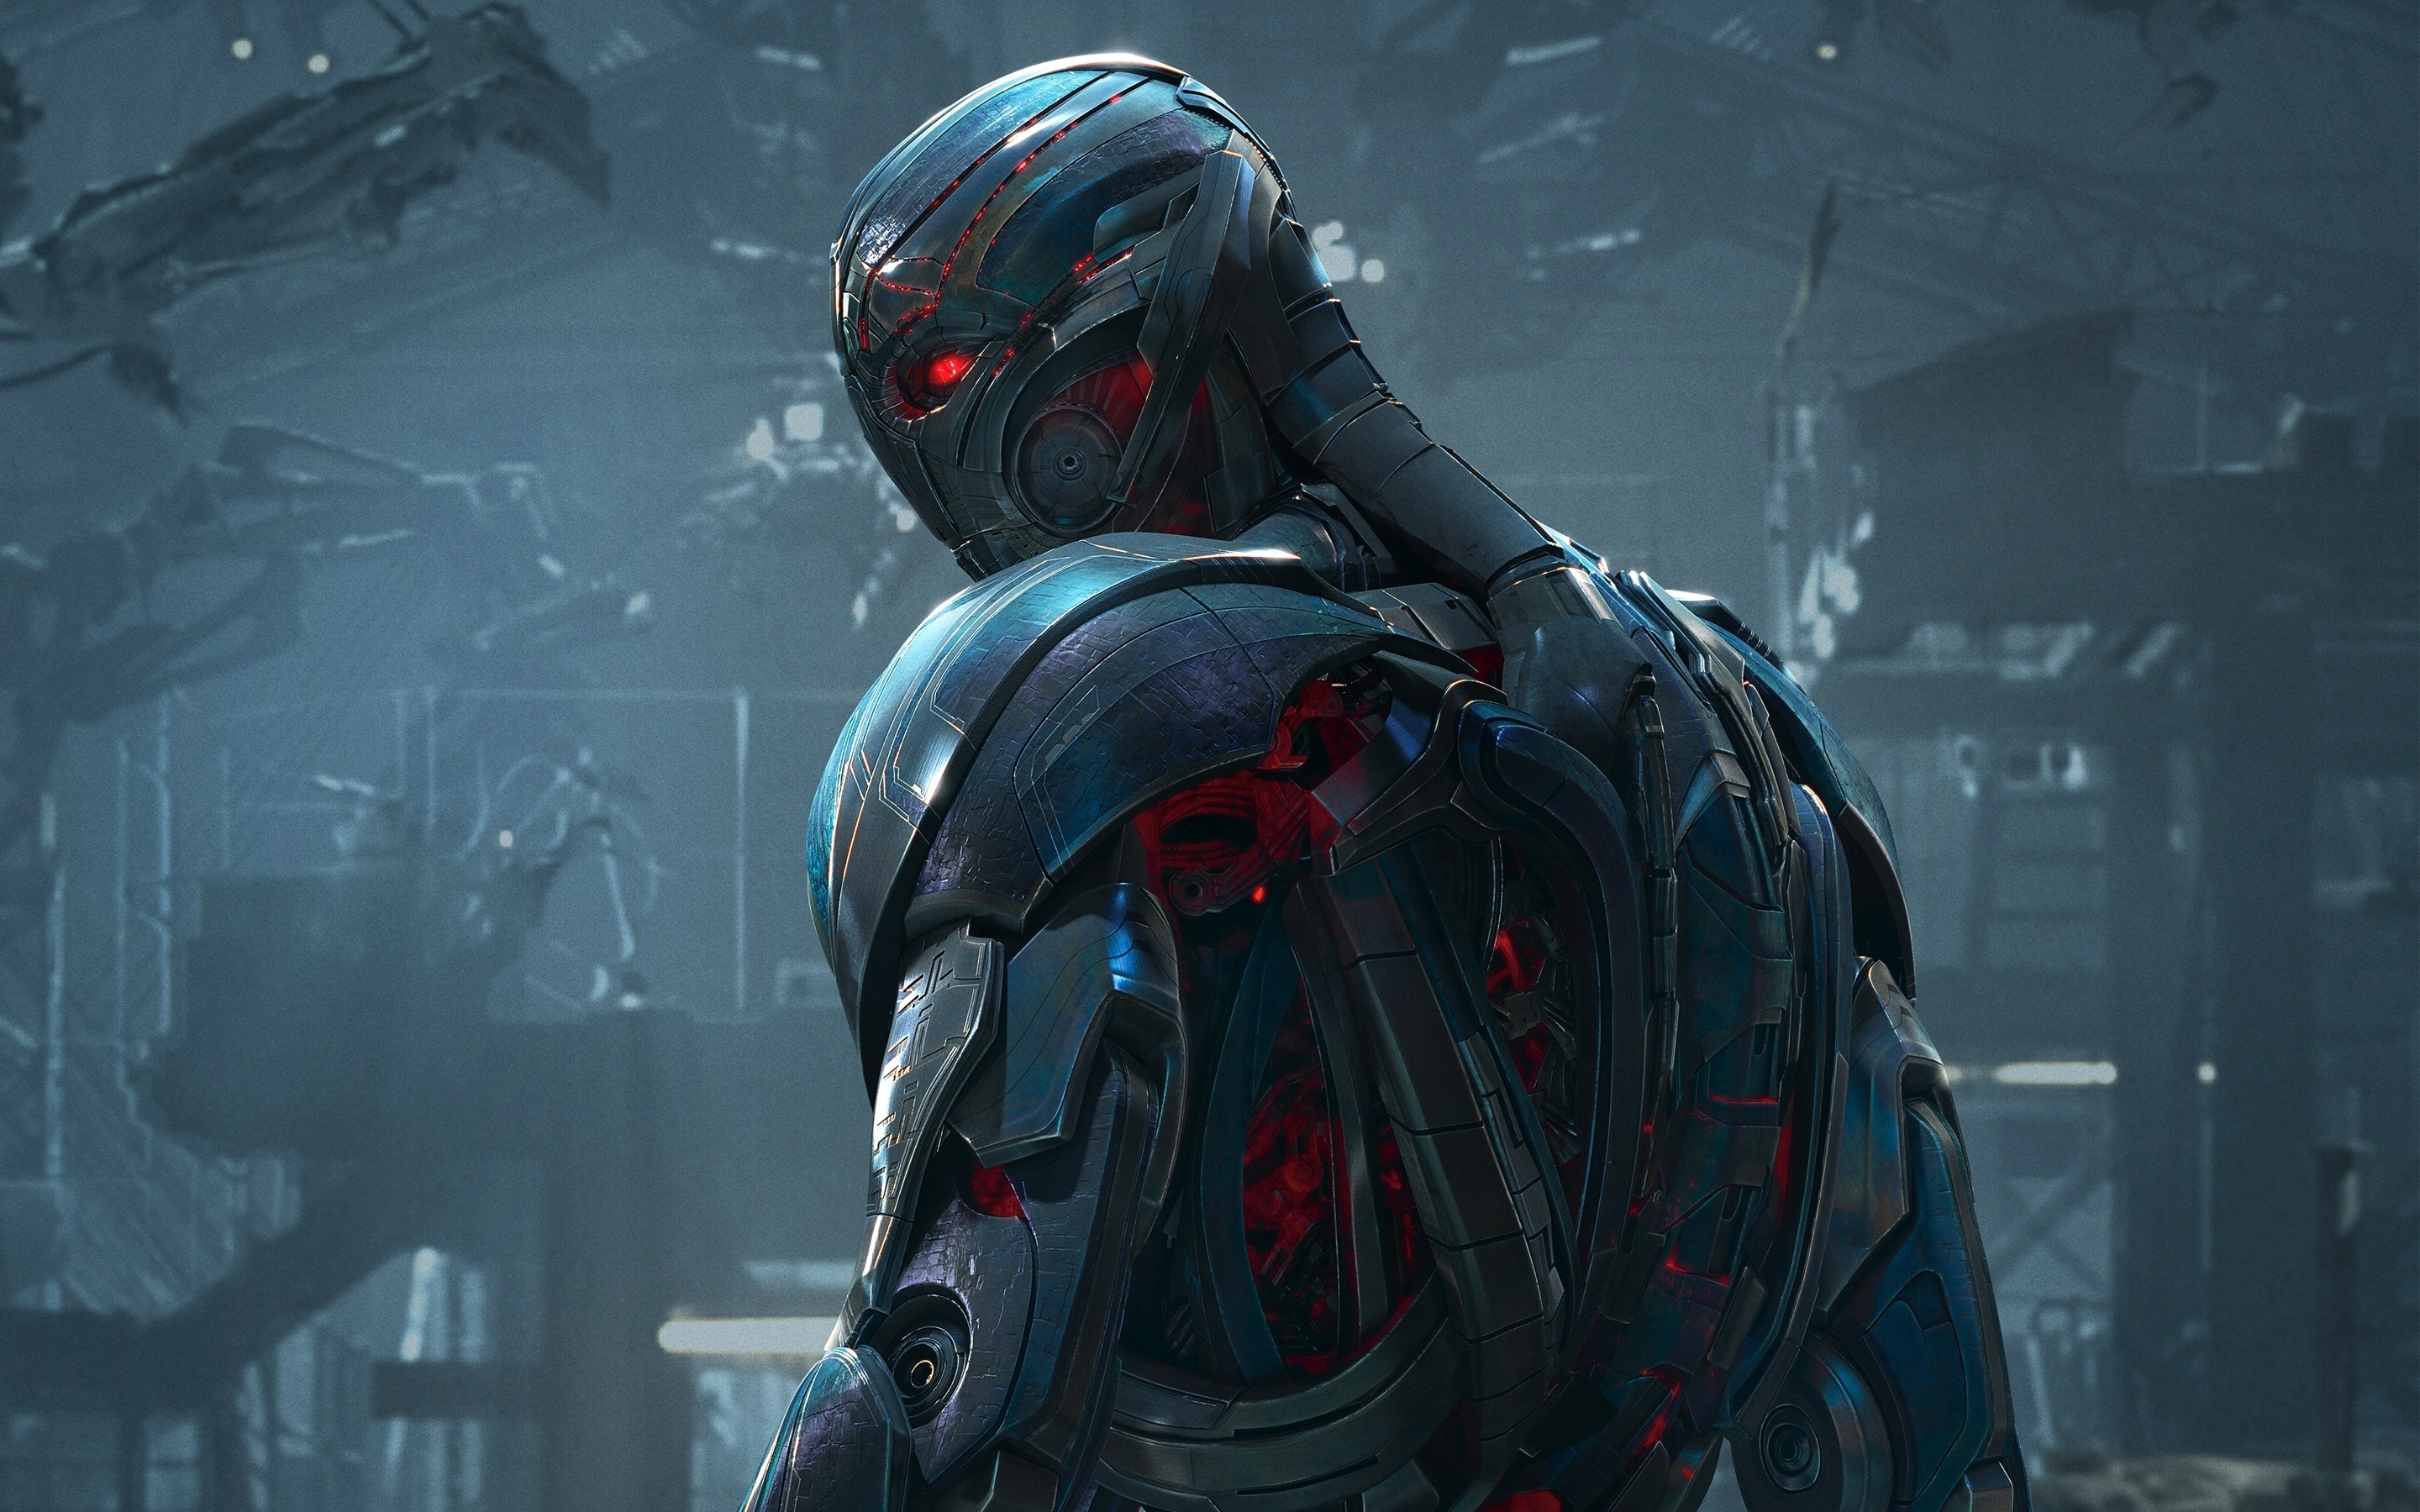 Ultron from Avengers for 2880 x 1800 Retina Display resolution